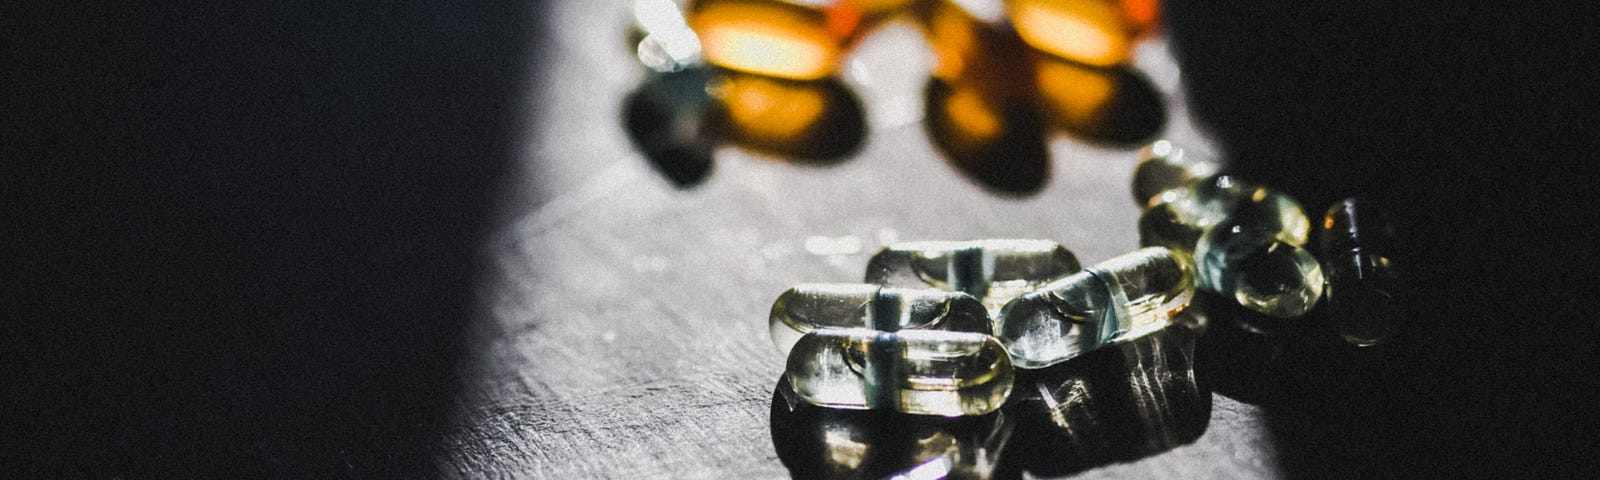 Capsules of supplements. Did you know that multivitamins are the most common dietary supplement in the U.S., with more than one-third of adults reporting regular multivitamin use?